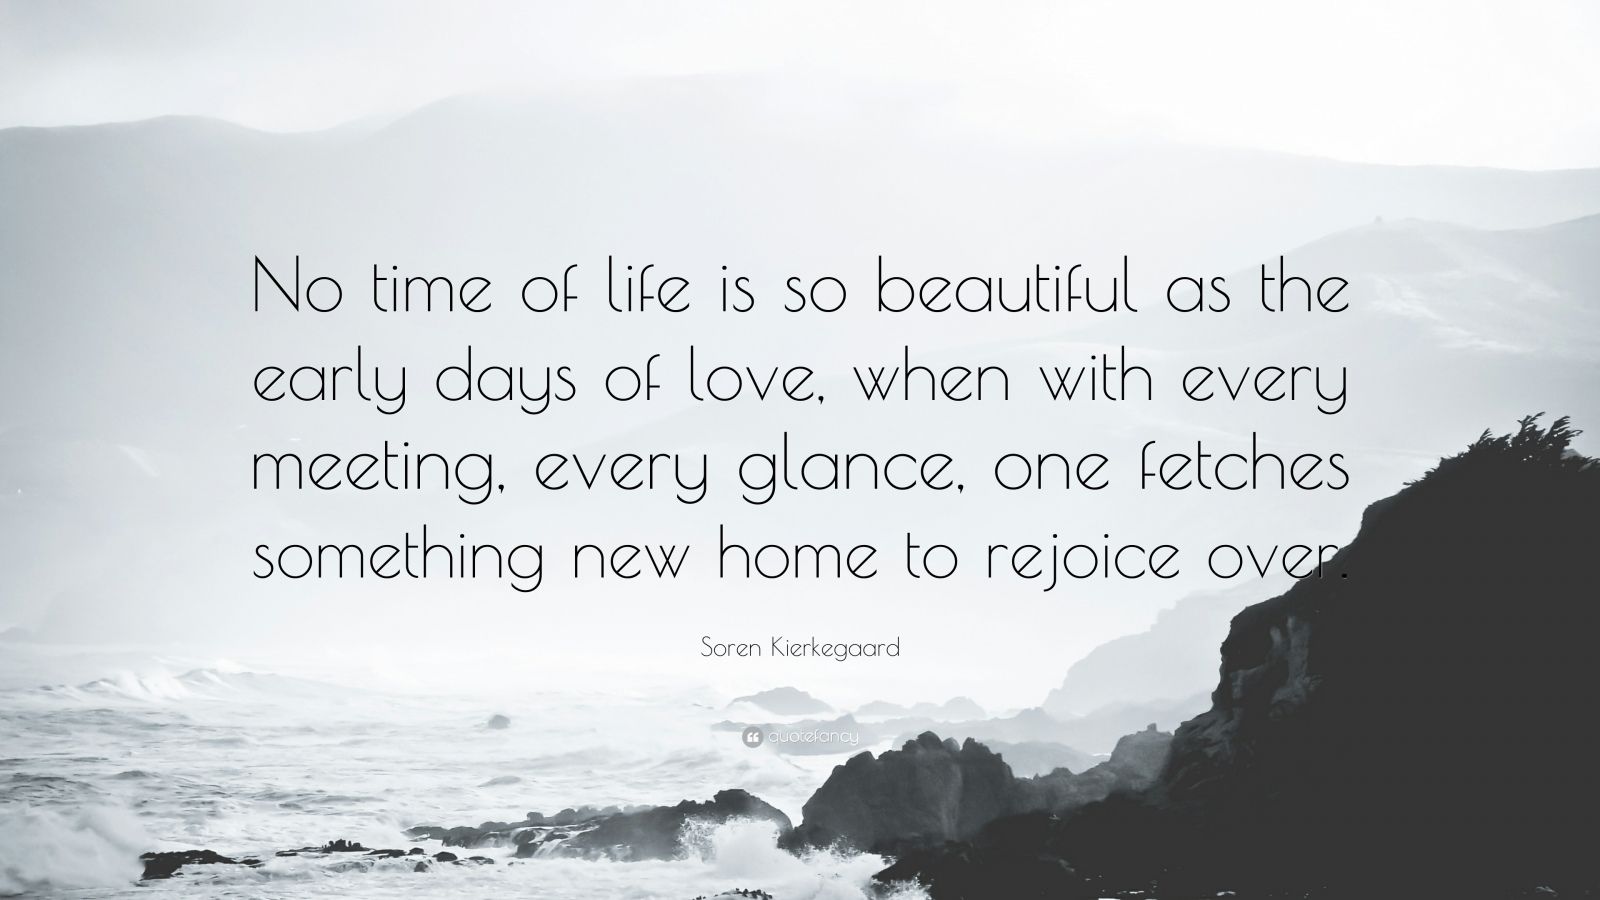 Soren Kierkegaard Quote “No time of life is so beautiful as the early days